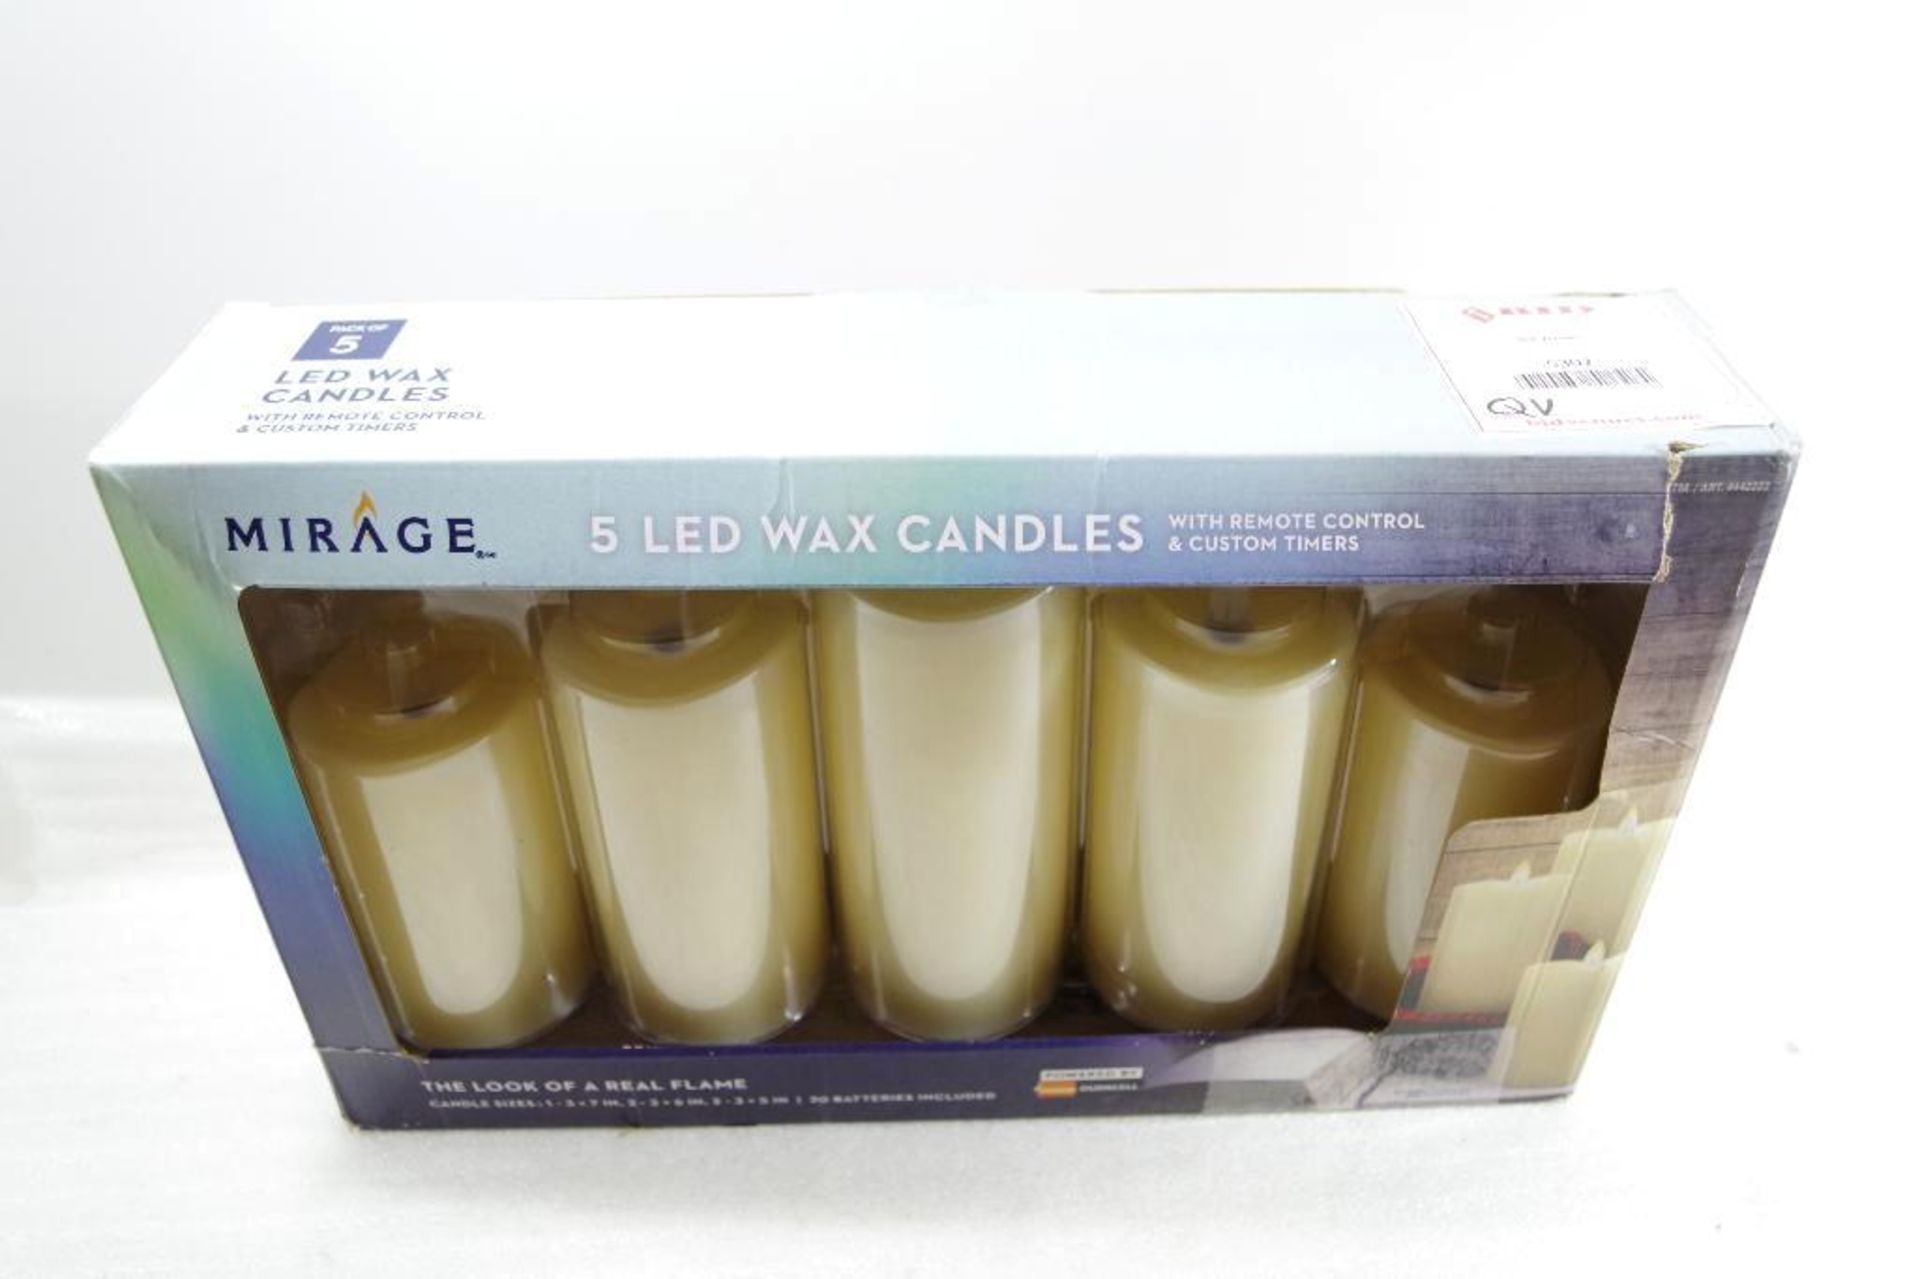 MIRAGE 5-LED Wax Candles w/ Remote Control & Custom Timers